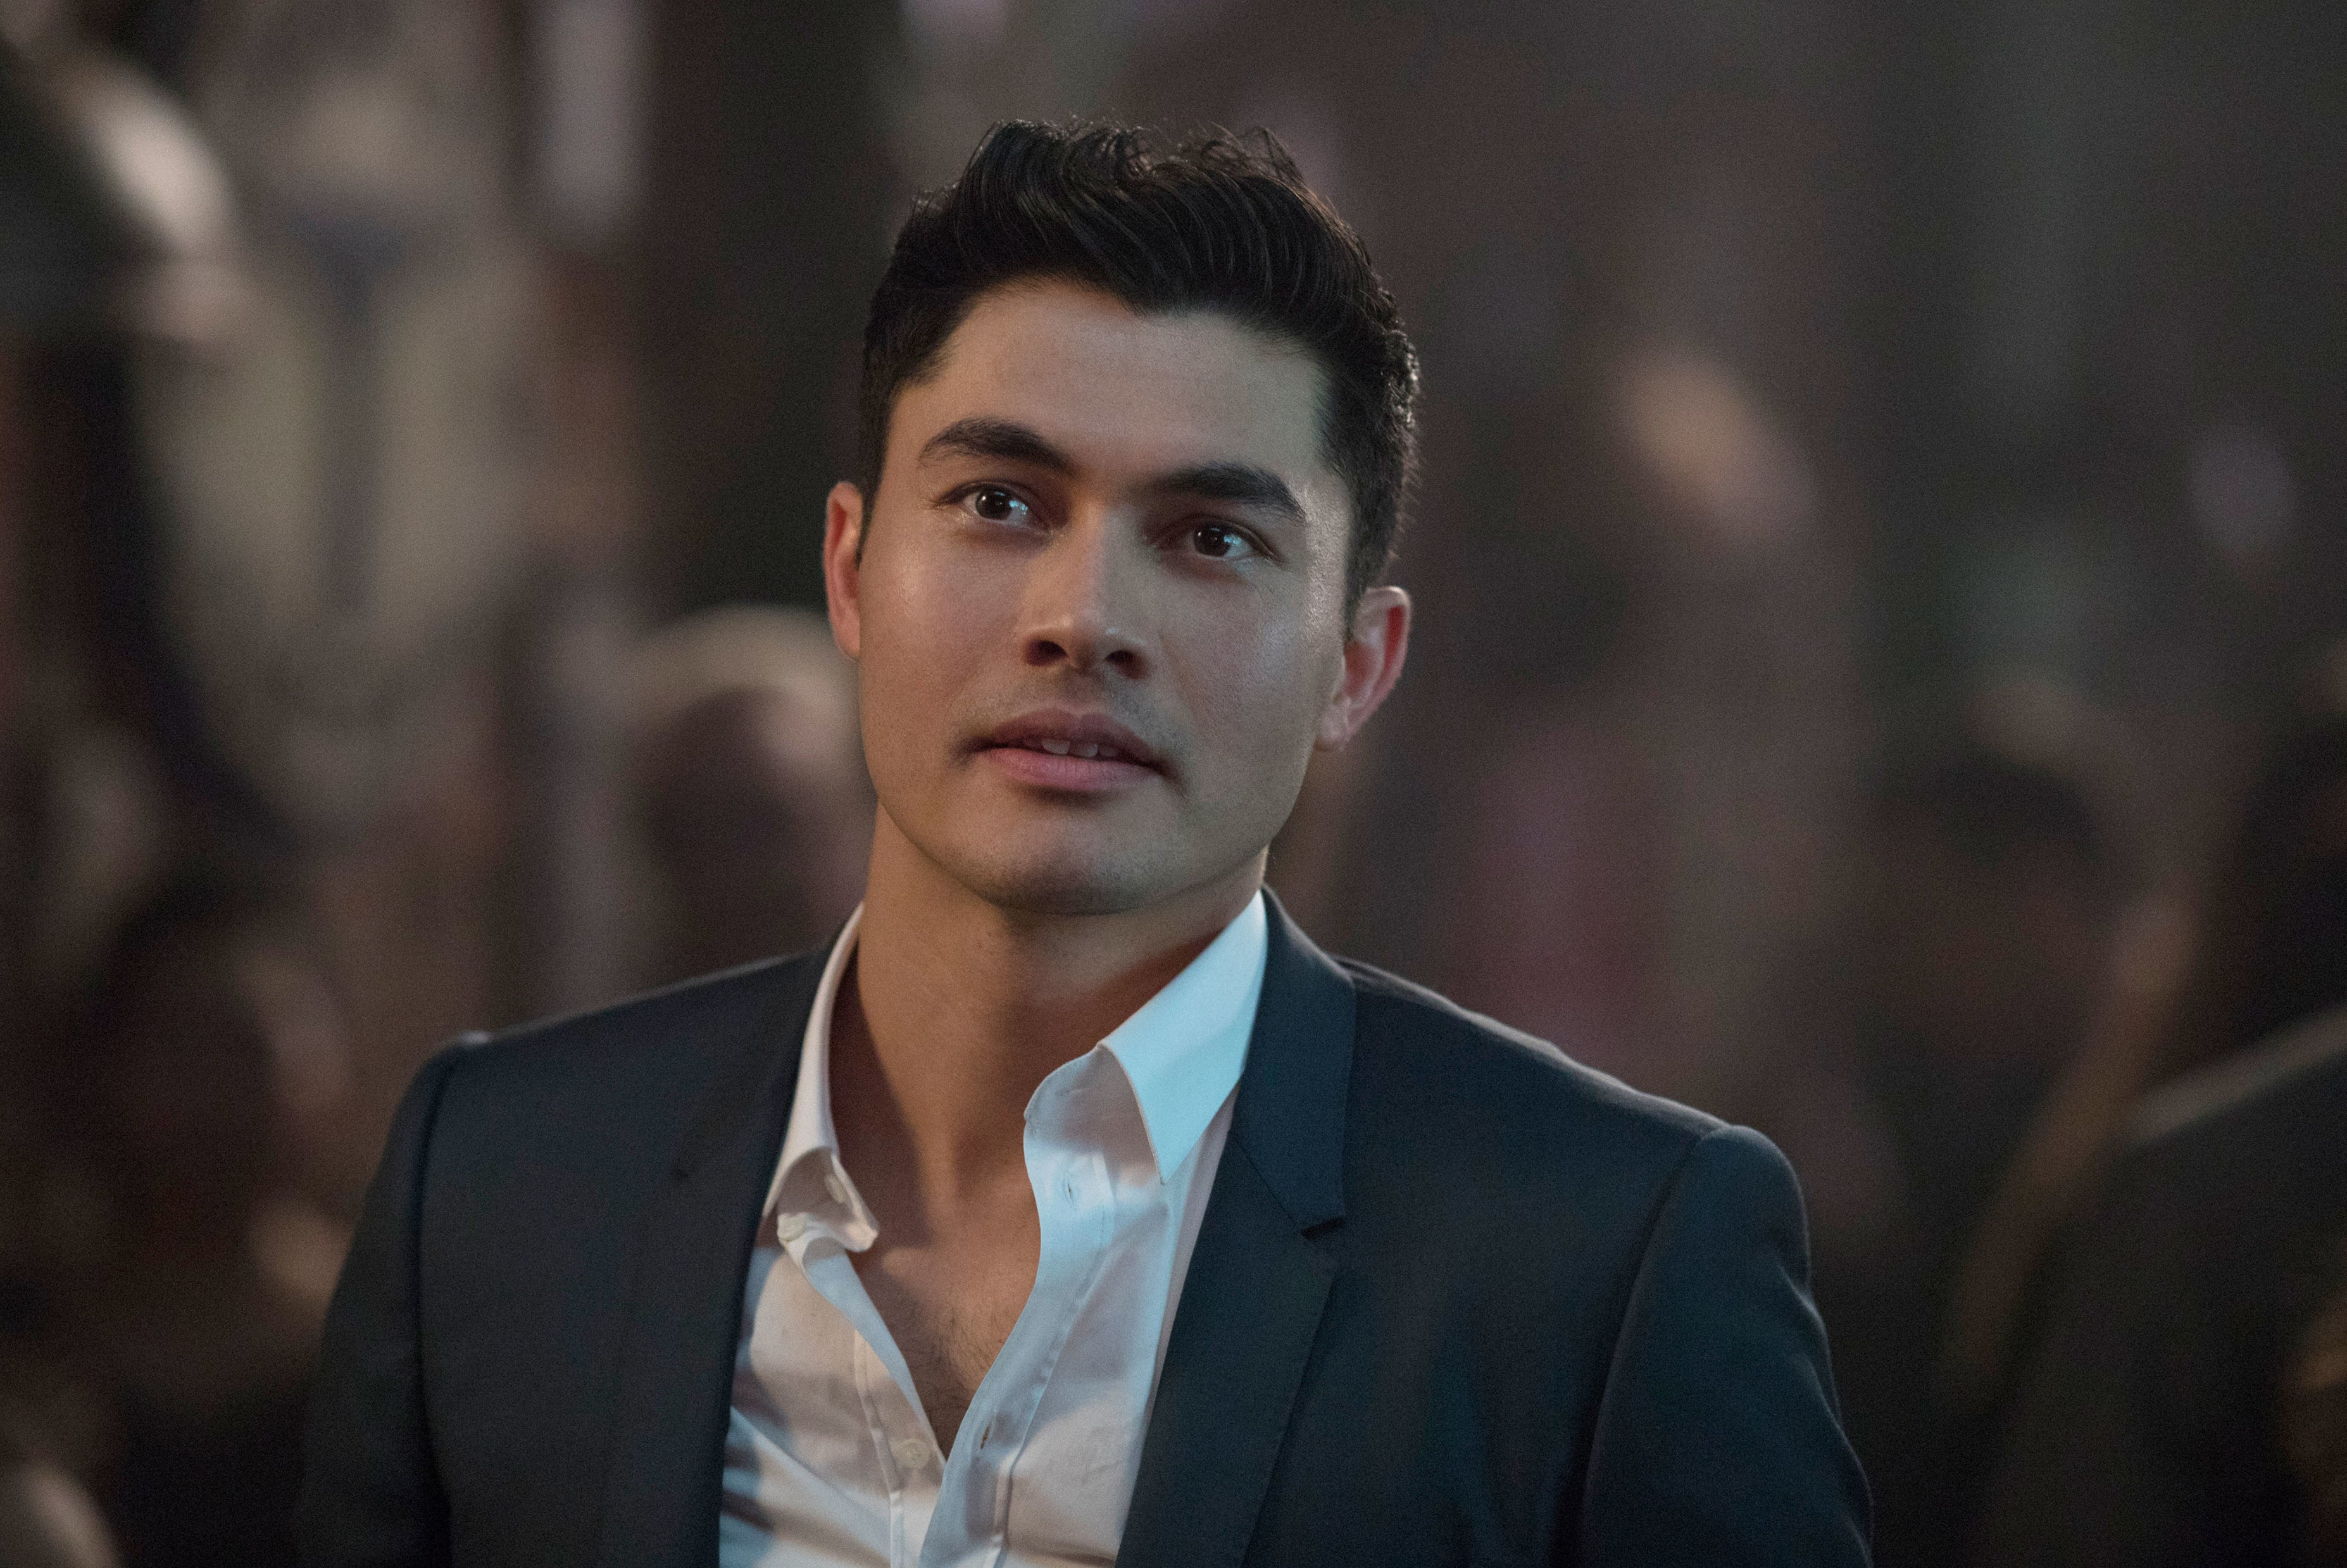 Henry Golding in a sharp suit looking pensive against a blurred background